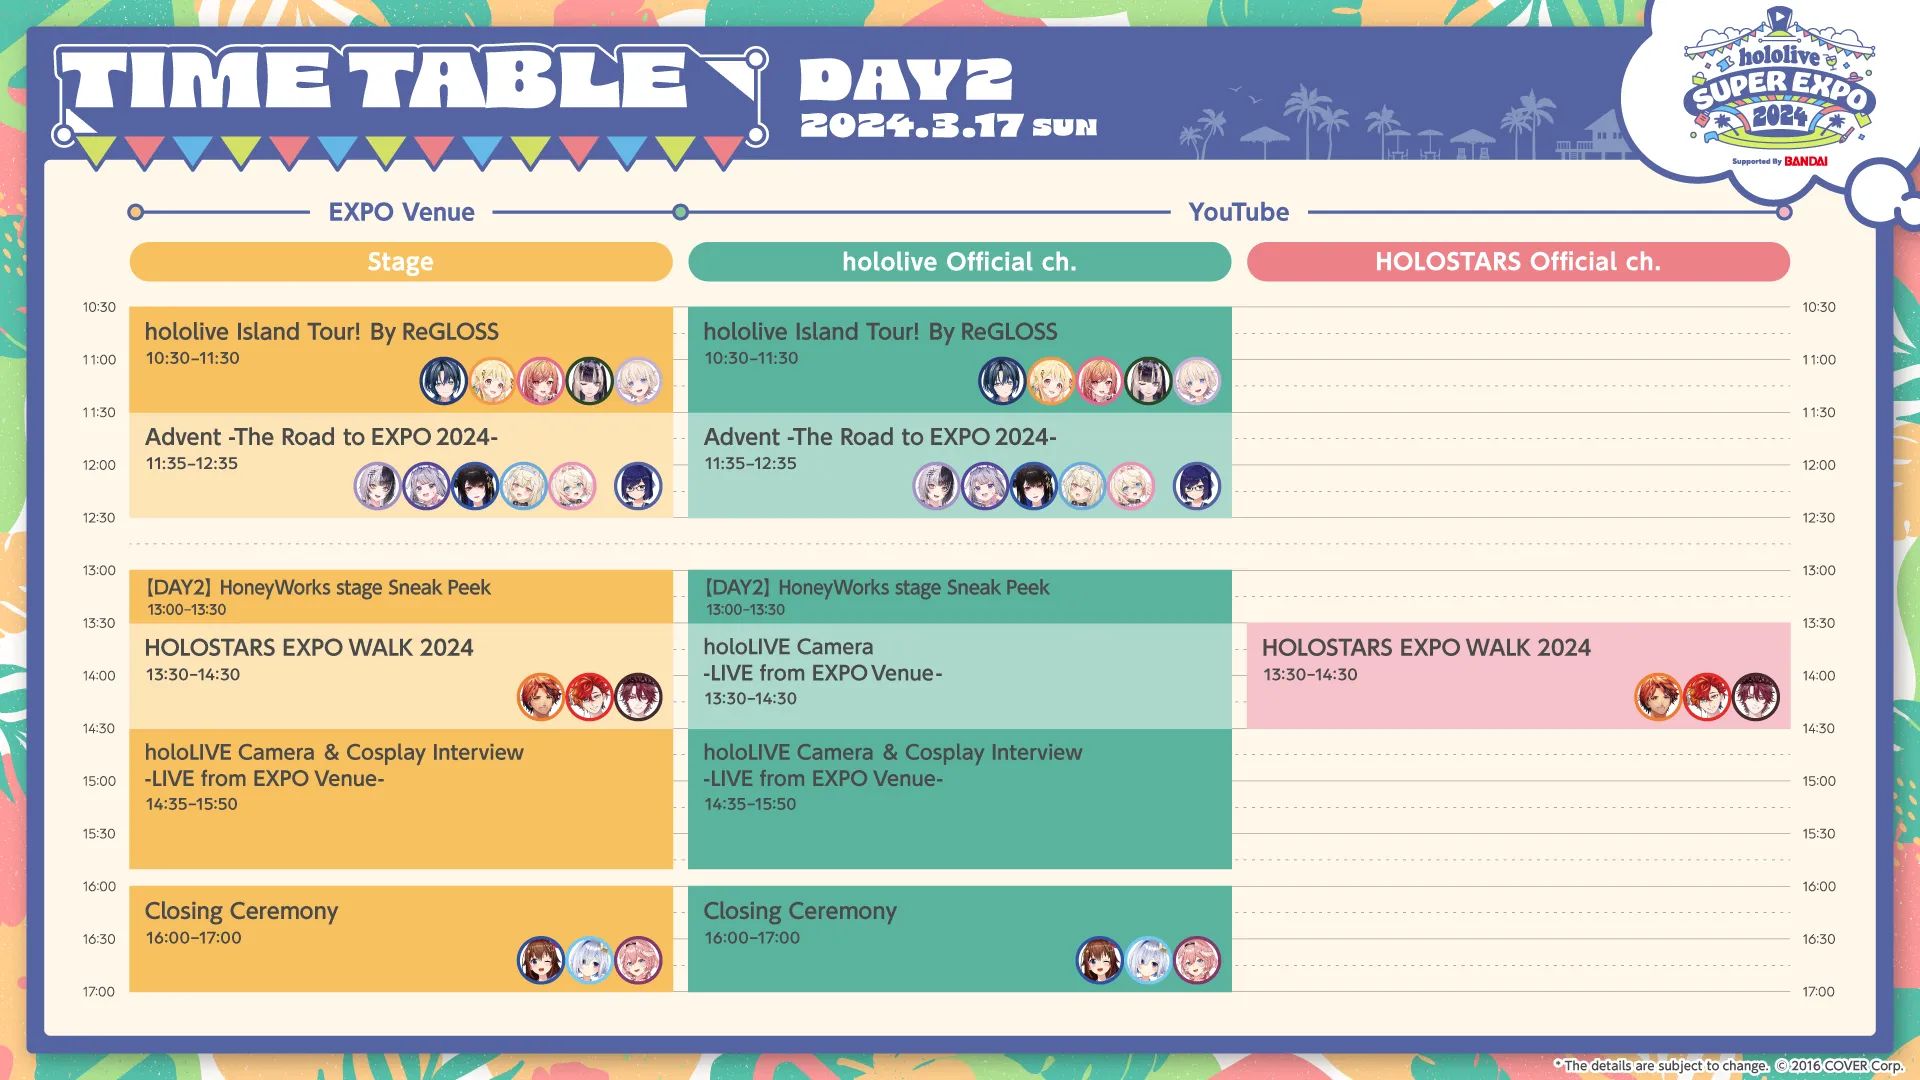 EXPO Stage Time Table DAY2